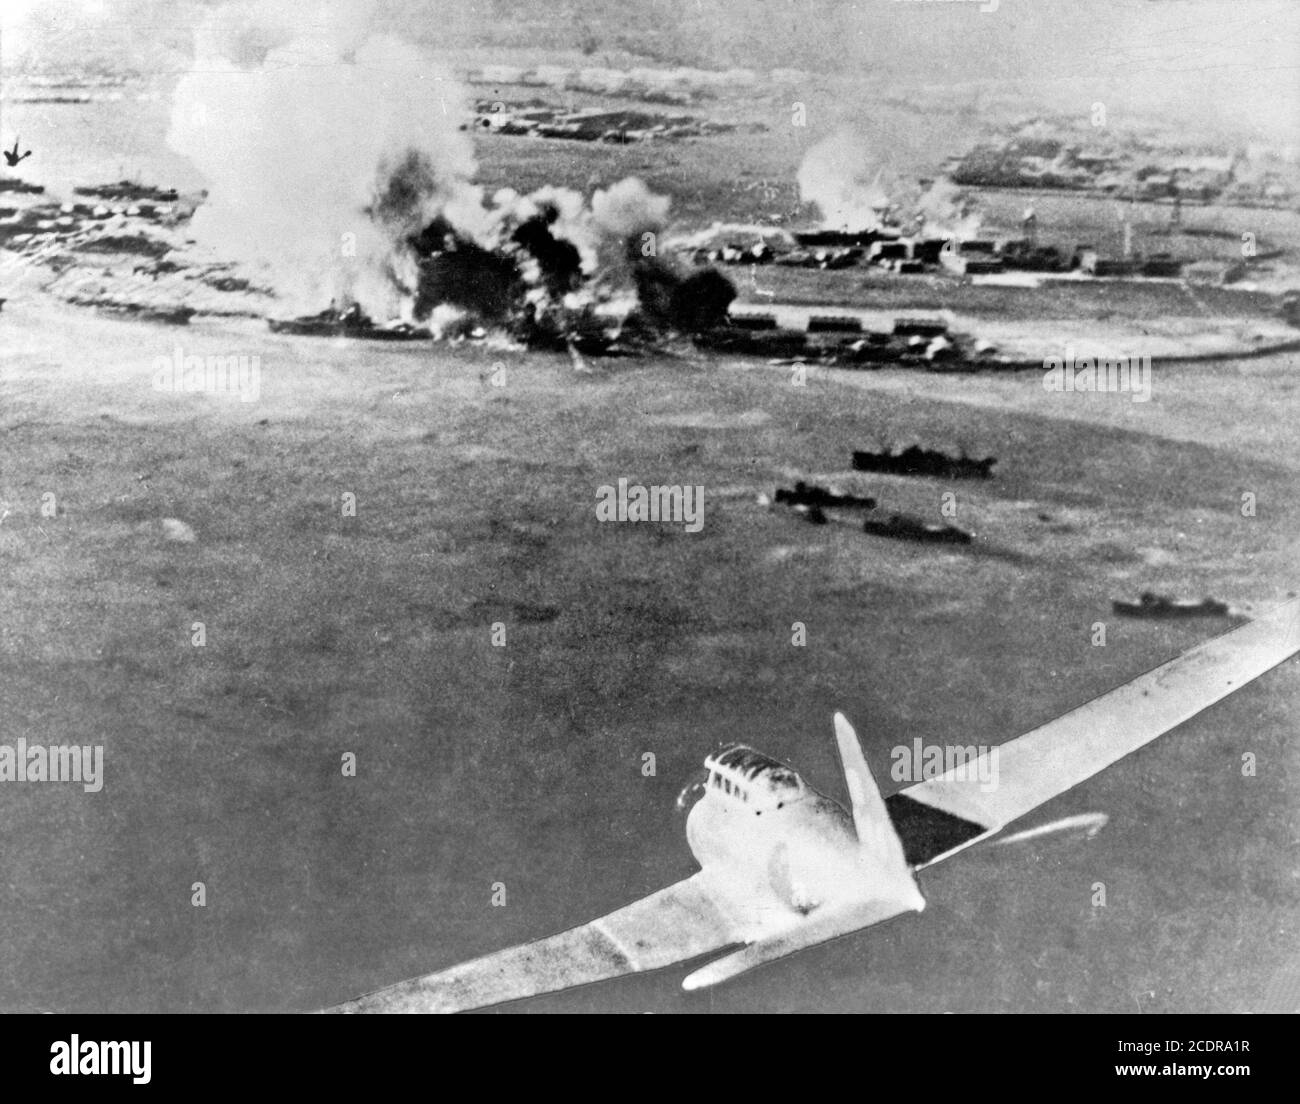 Pearl Harbor 1941. Photograph from a Japanese torpedo bomber during the Pearl Harbor attack on December 7, 1941. Stock Photo